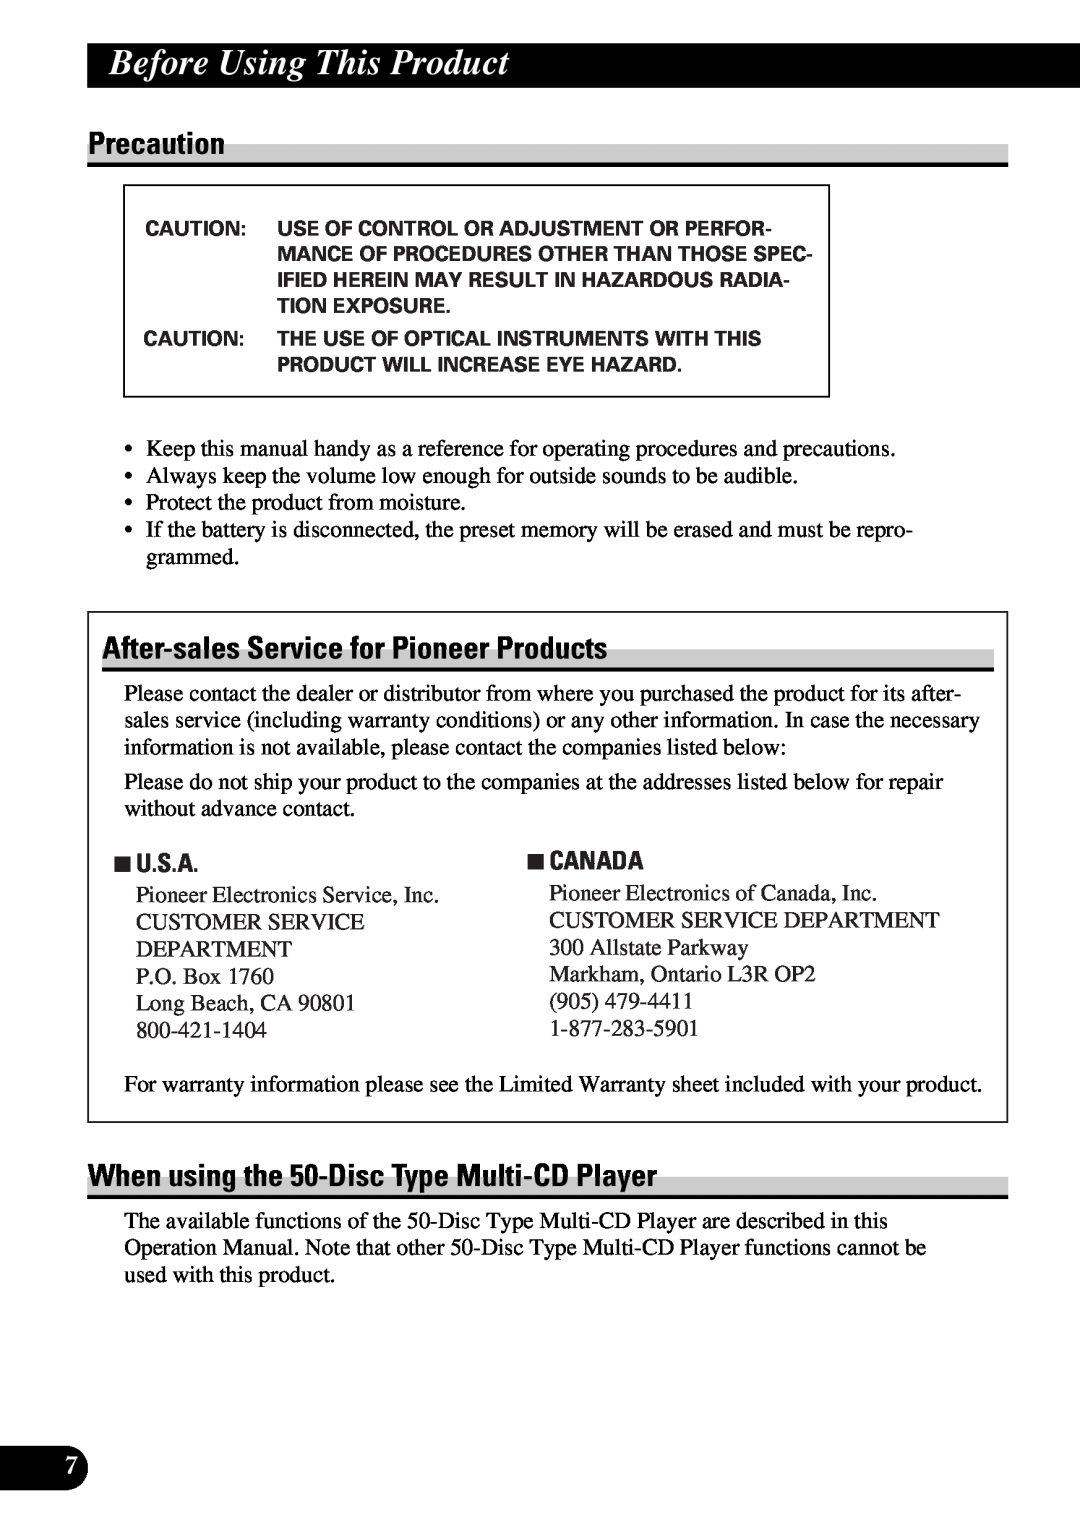 Pioneer DEH-P730 Precaution, After-sales Service for Pioneer Products, When using the 50-Disc Type Multi-CD Player, 7U.S.A 